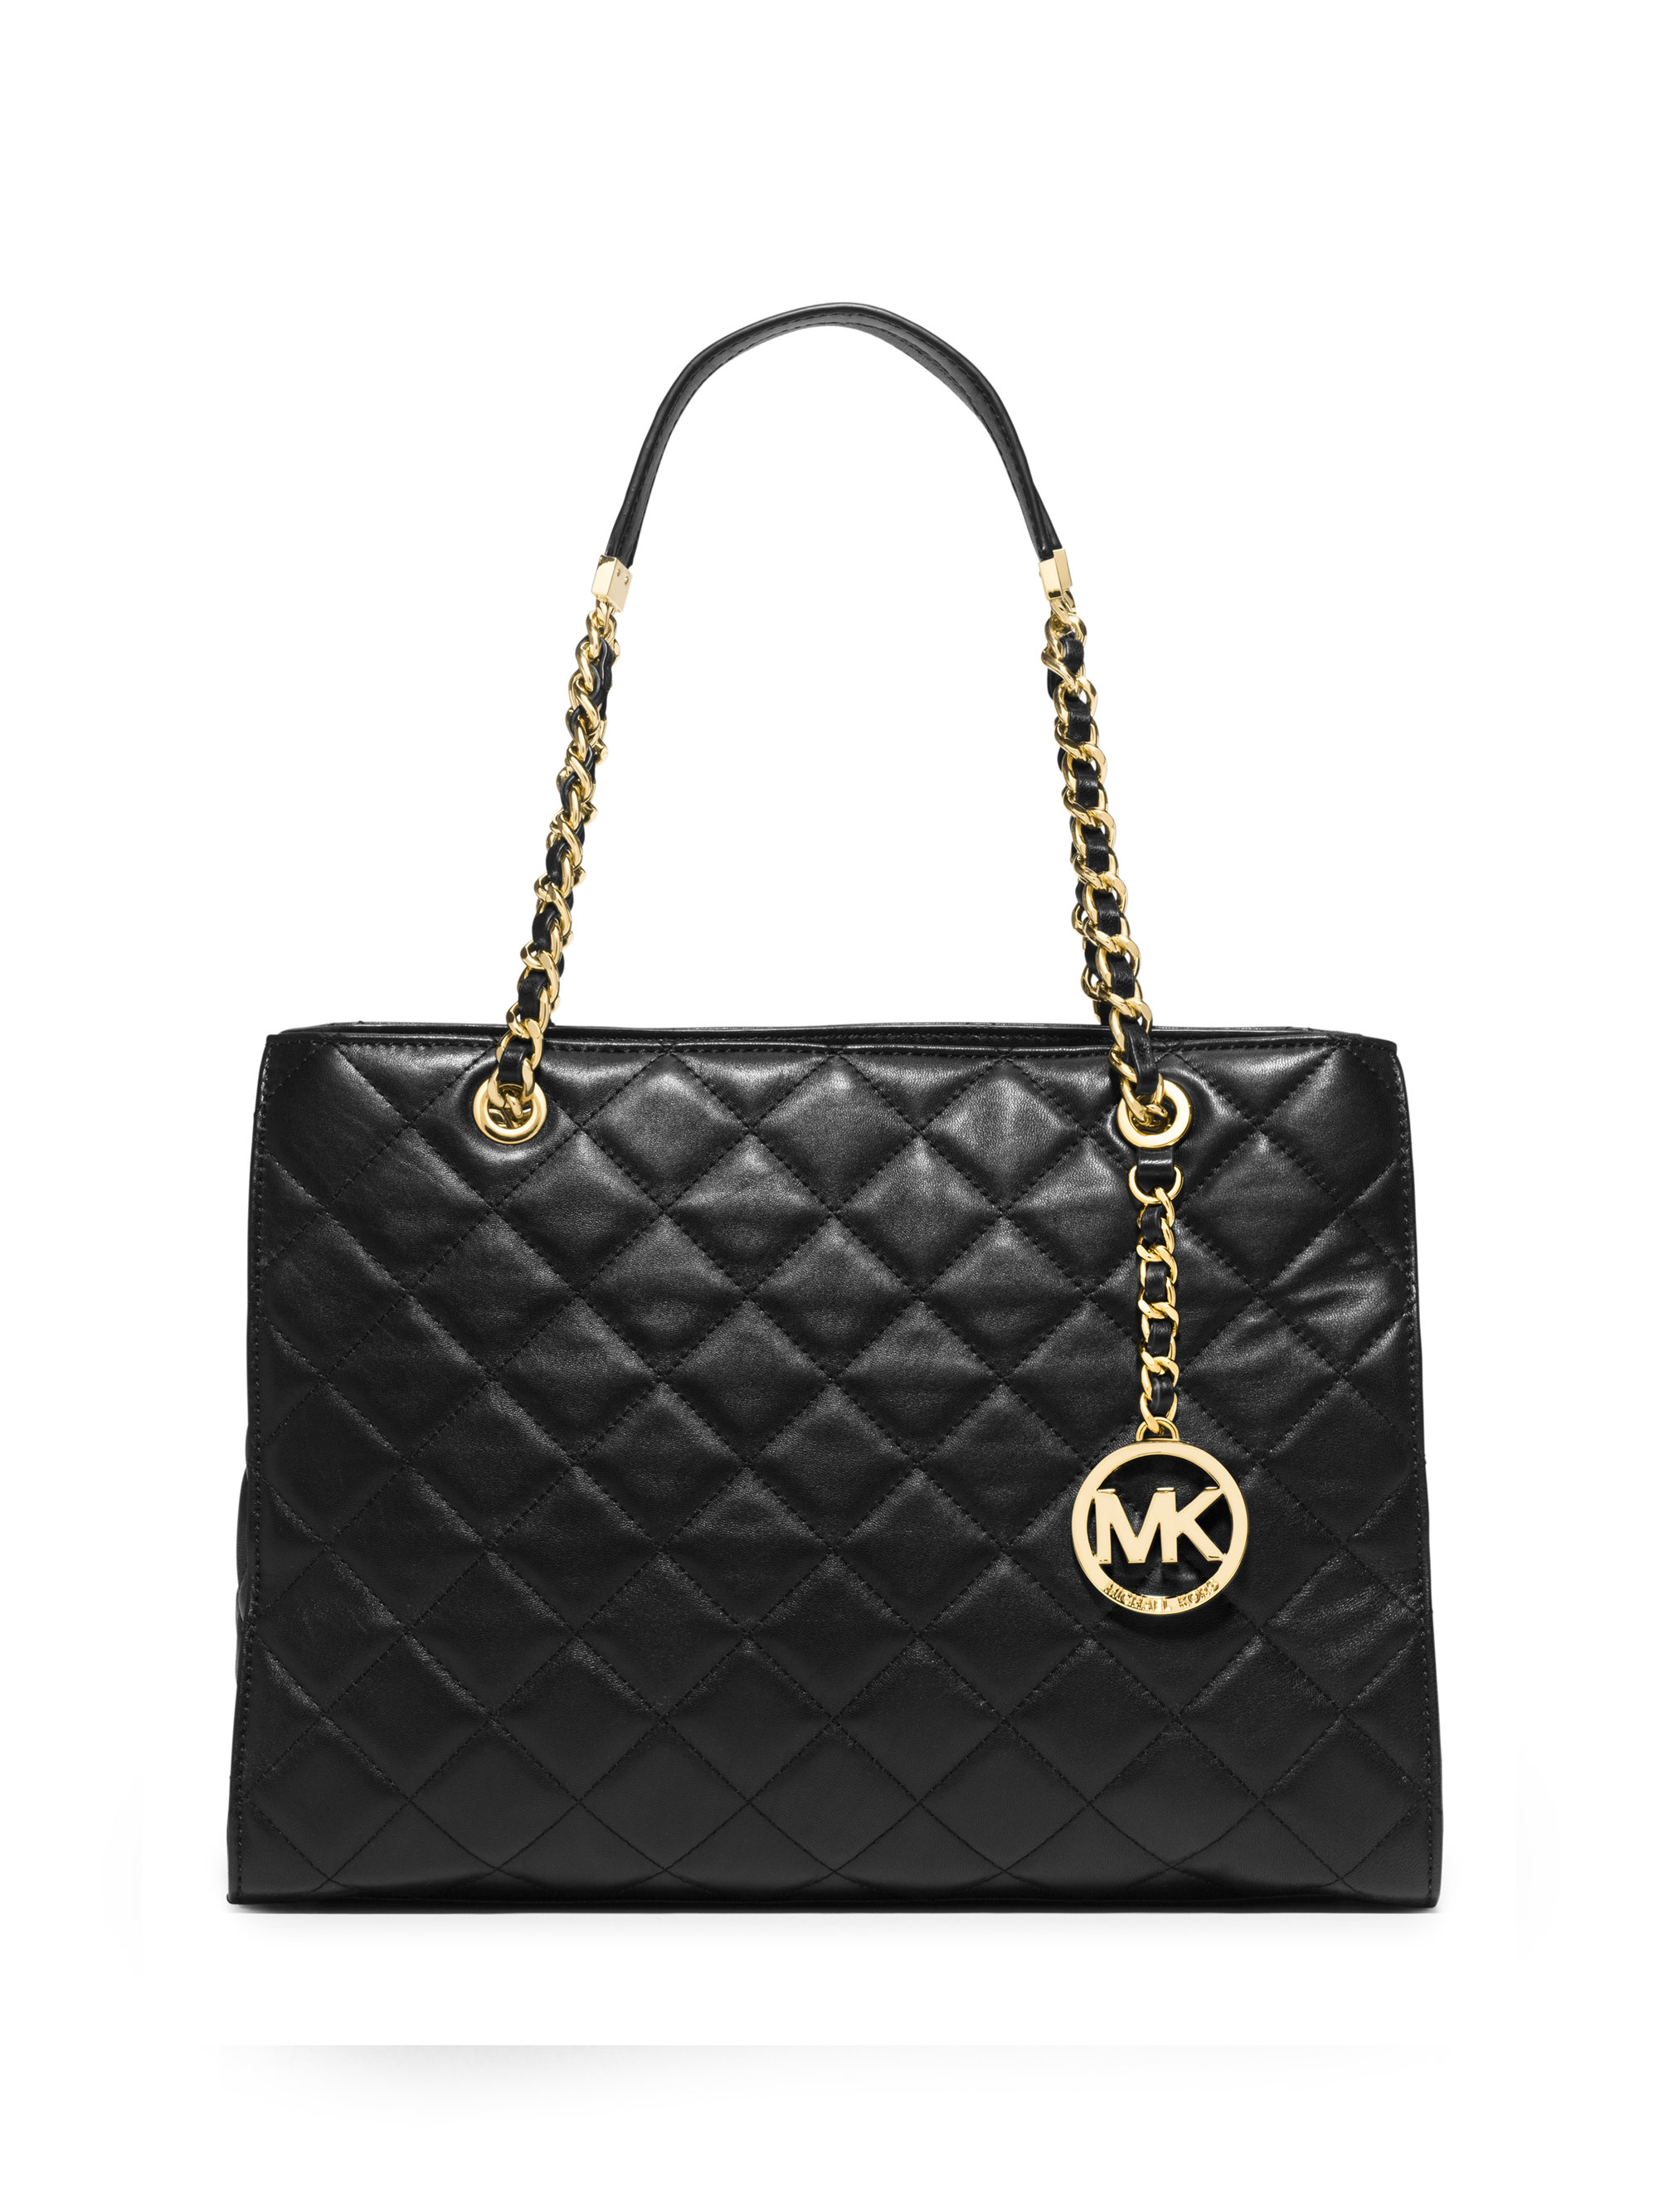 MICHAEL Michael Kors Susannah Large Quilted Leather Chain Shoulder Tote in Black - Lyst